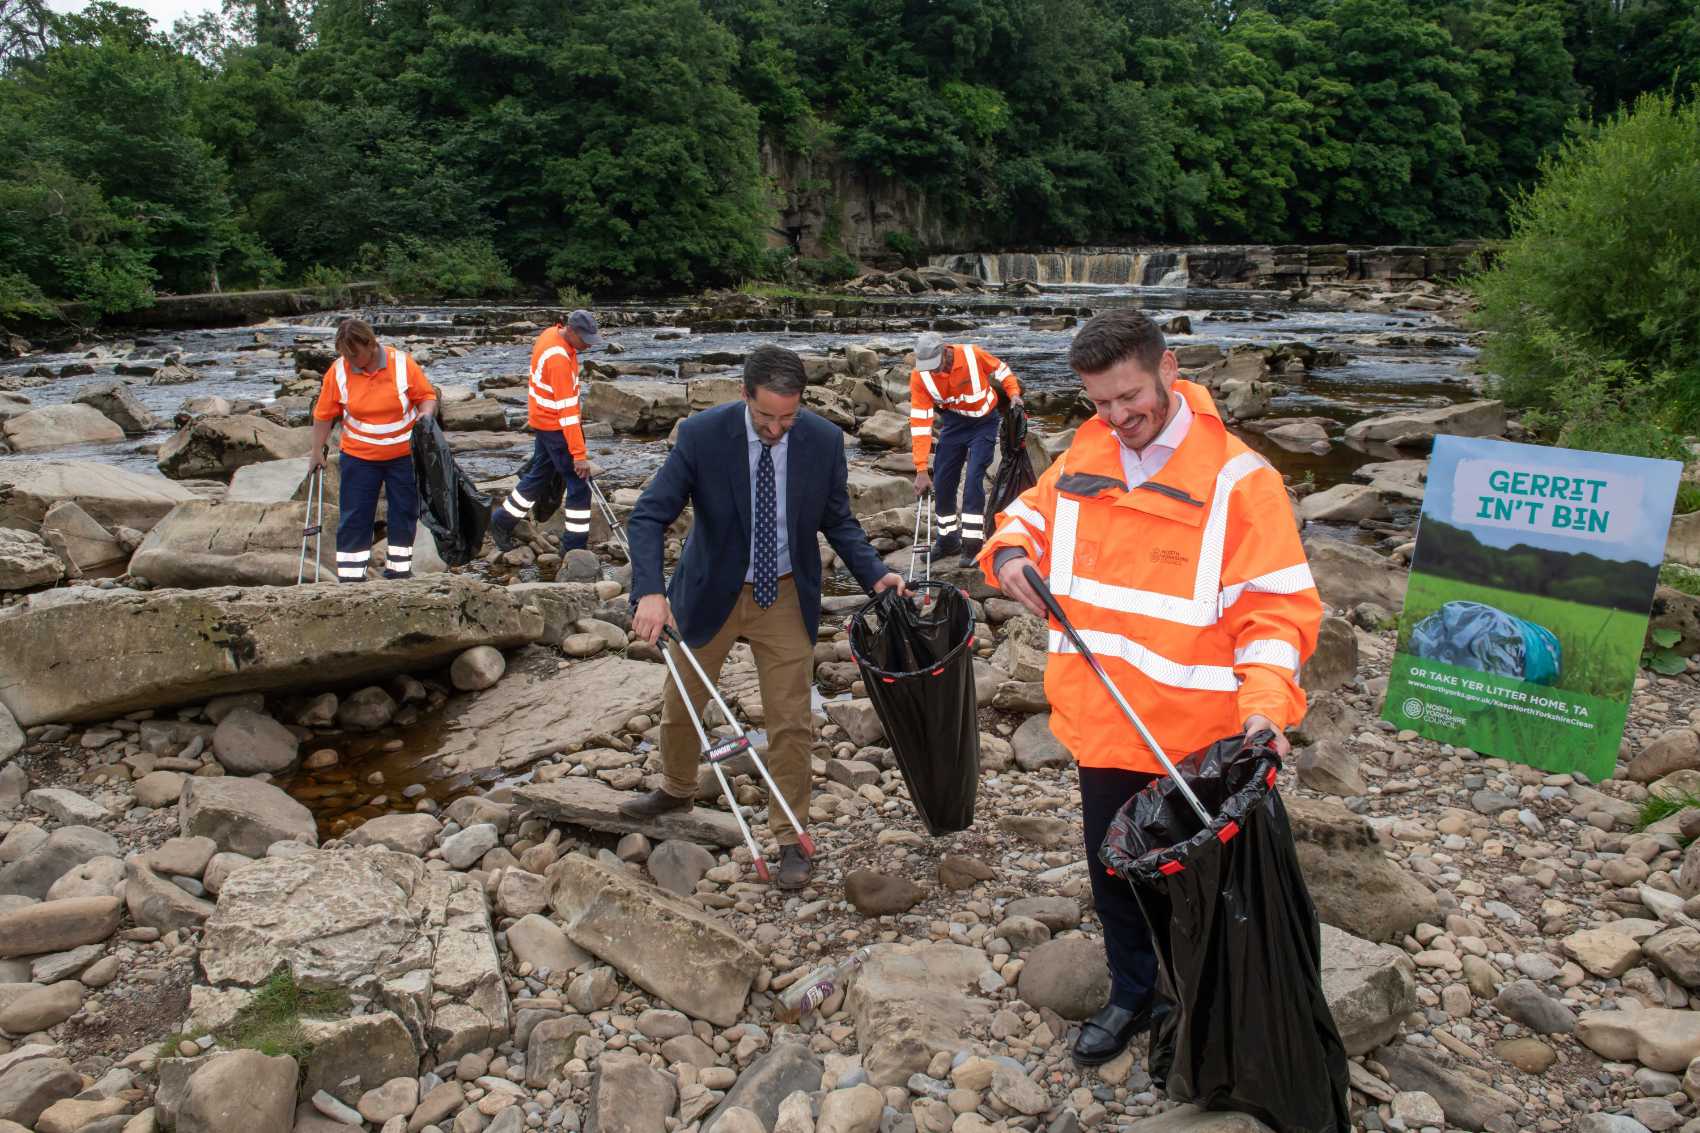 North Yorkshire Council’s executive member for street scene, Cllr Keane Duncan, with North Yorkshire Council’s assistant director for environment services, Michael Leah, at Richmond Falls along with members of North Yorkshire Council’s street scene team.